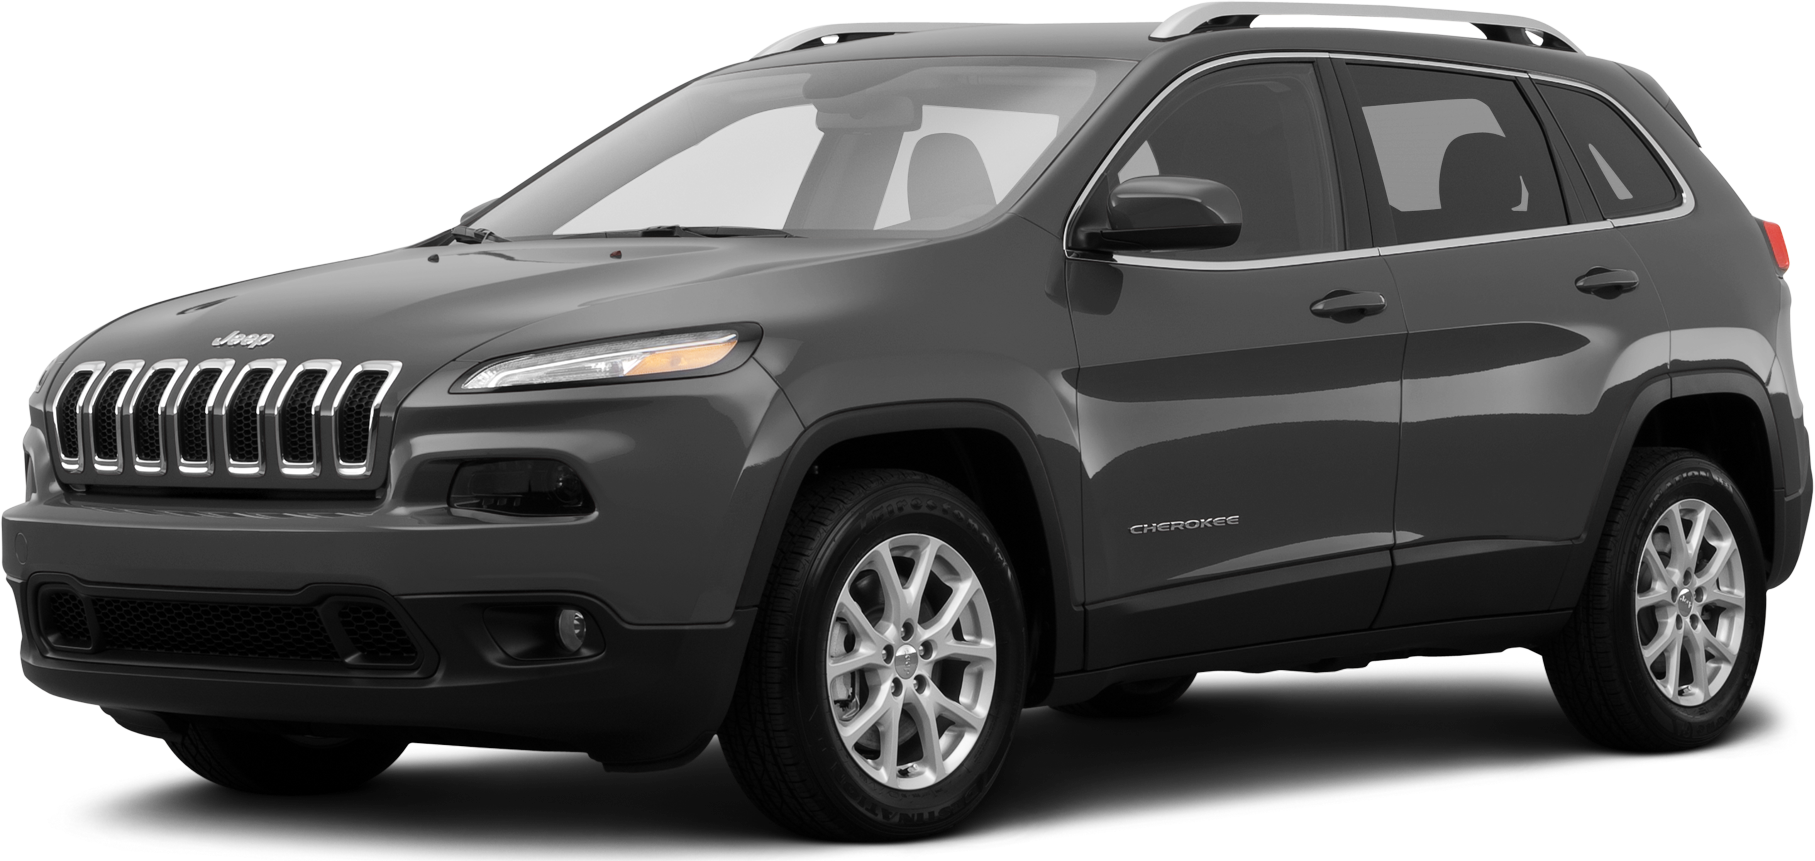 2014 Jeep Cherokee Price Value Ratings And Reviews Kelley Blue Book